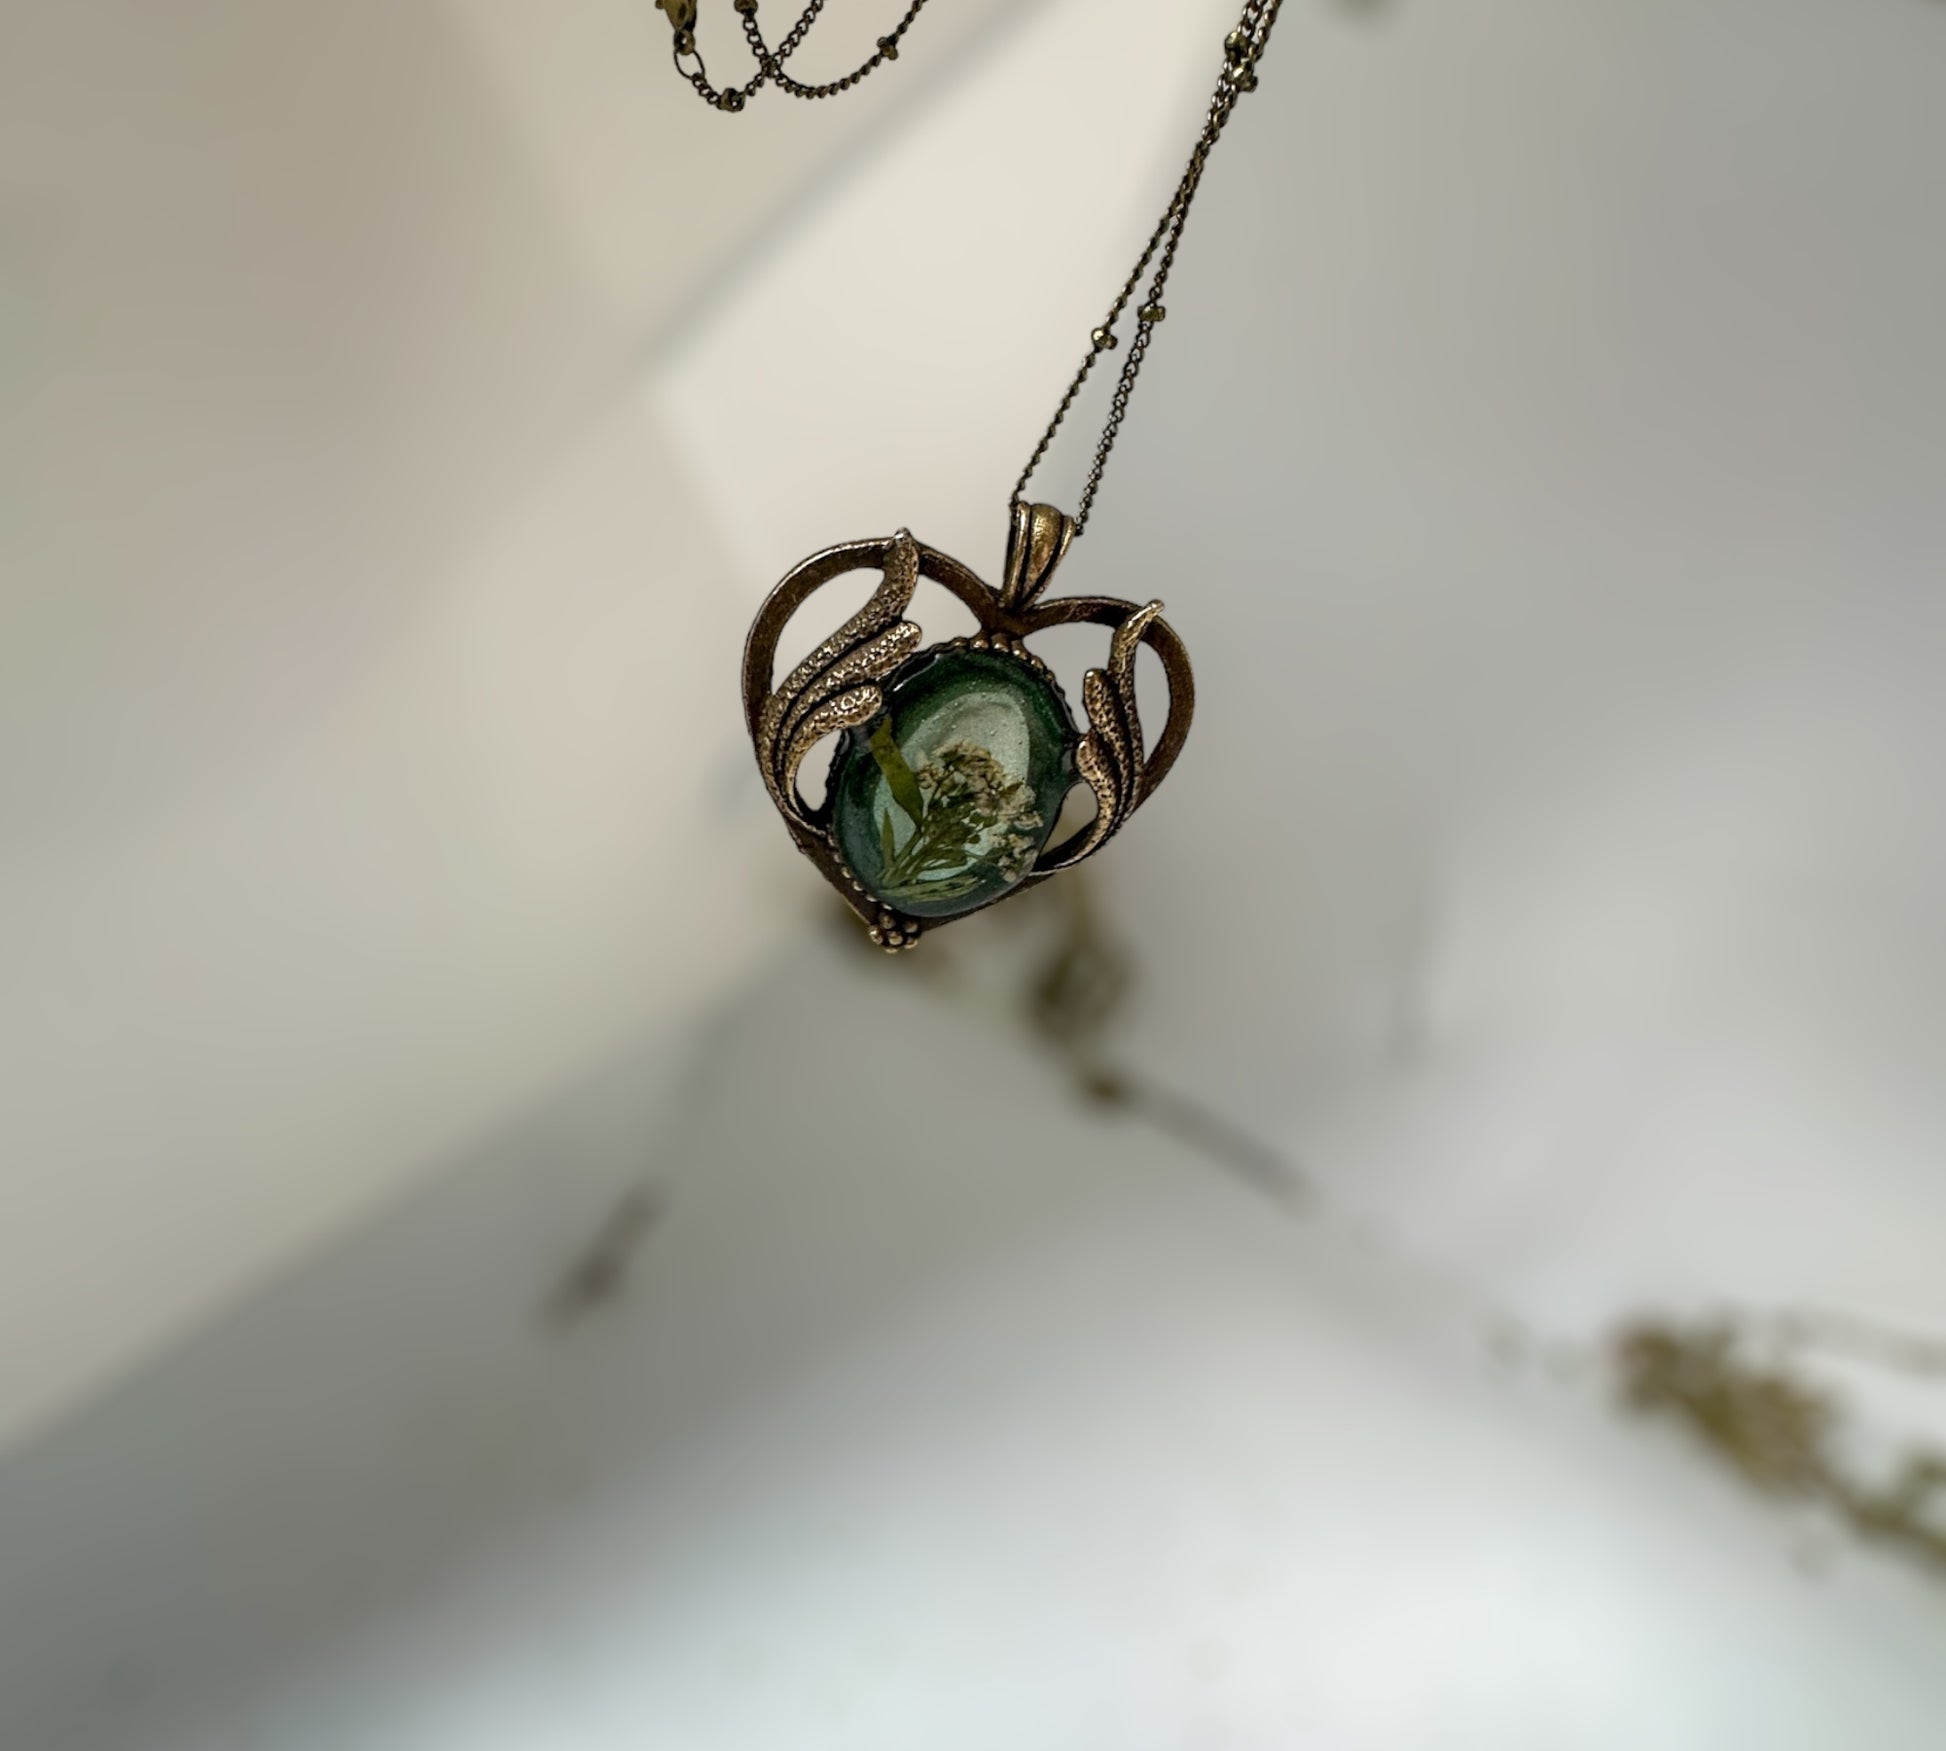 Antique Bronze Heart Necklace with Pressed Flowers -Botanical Elegance